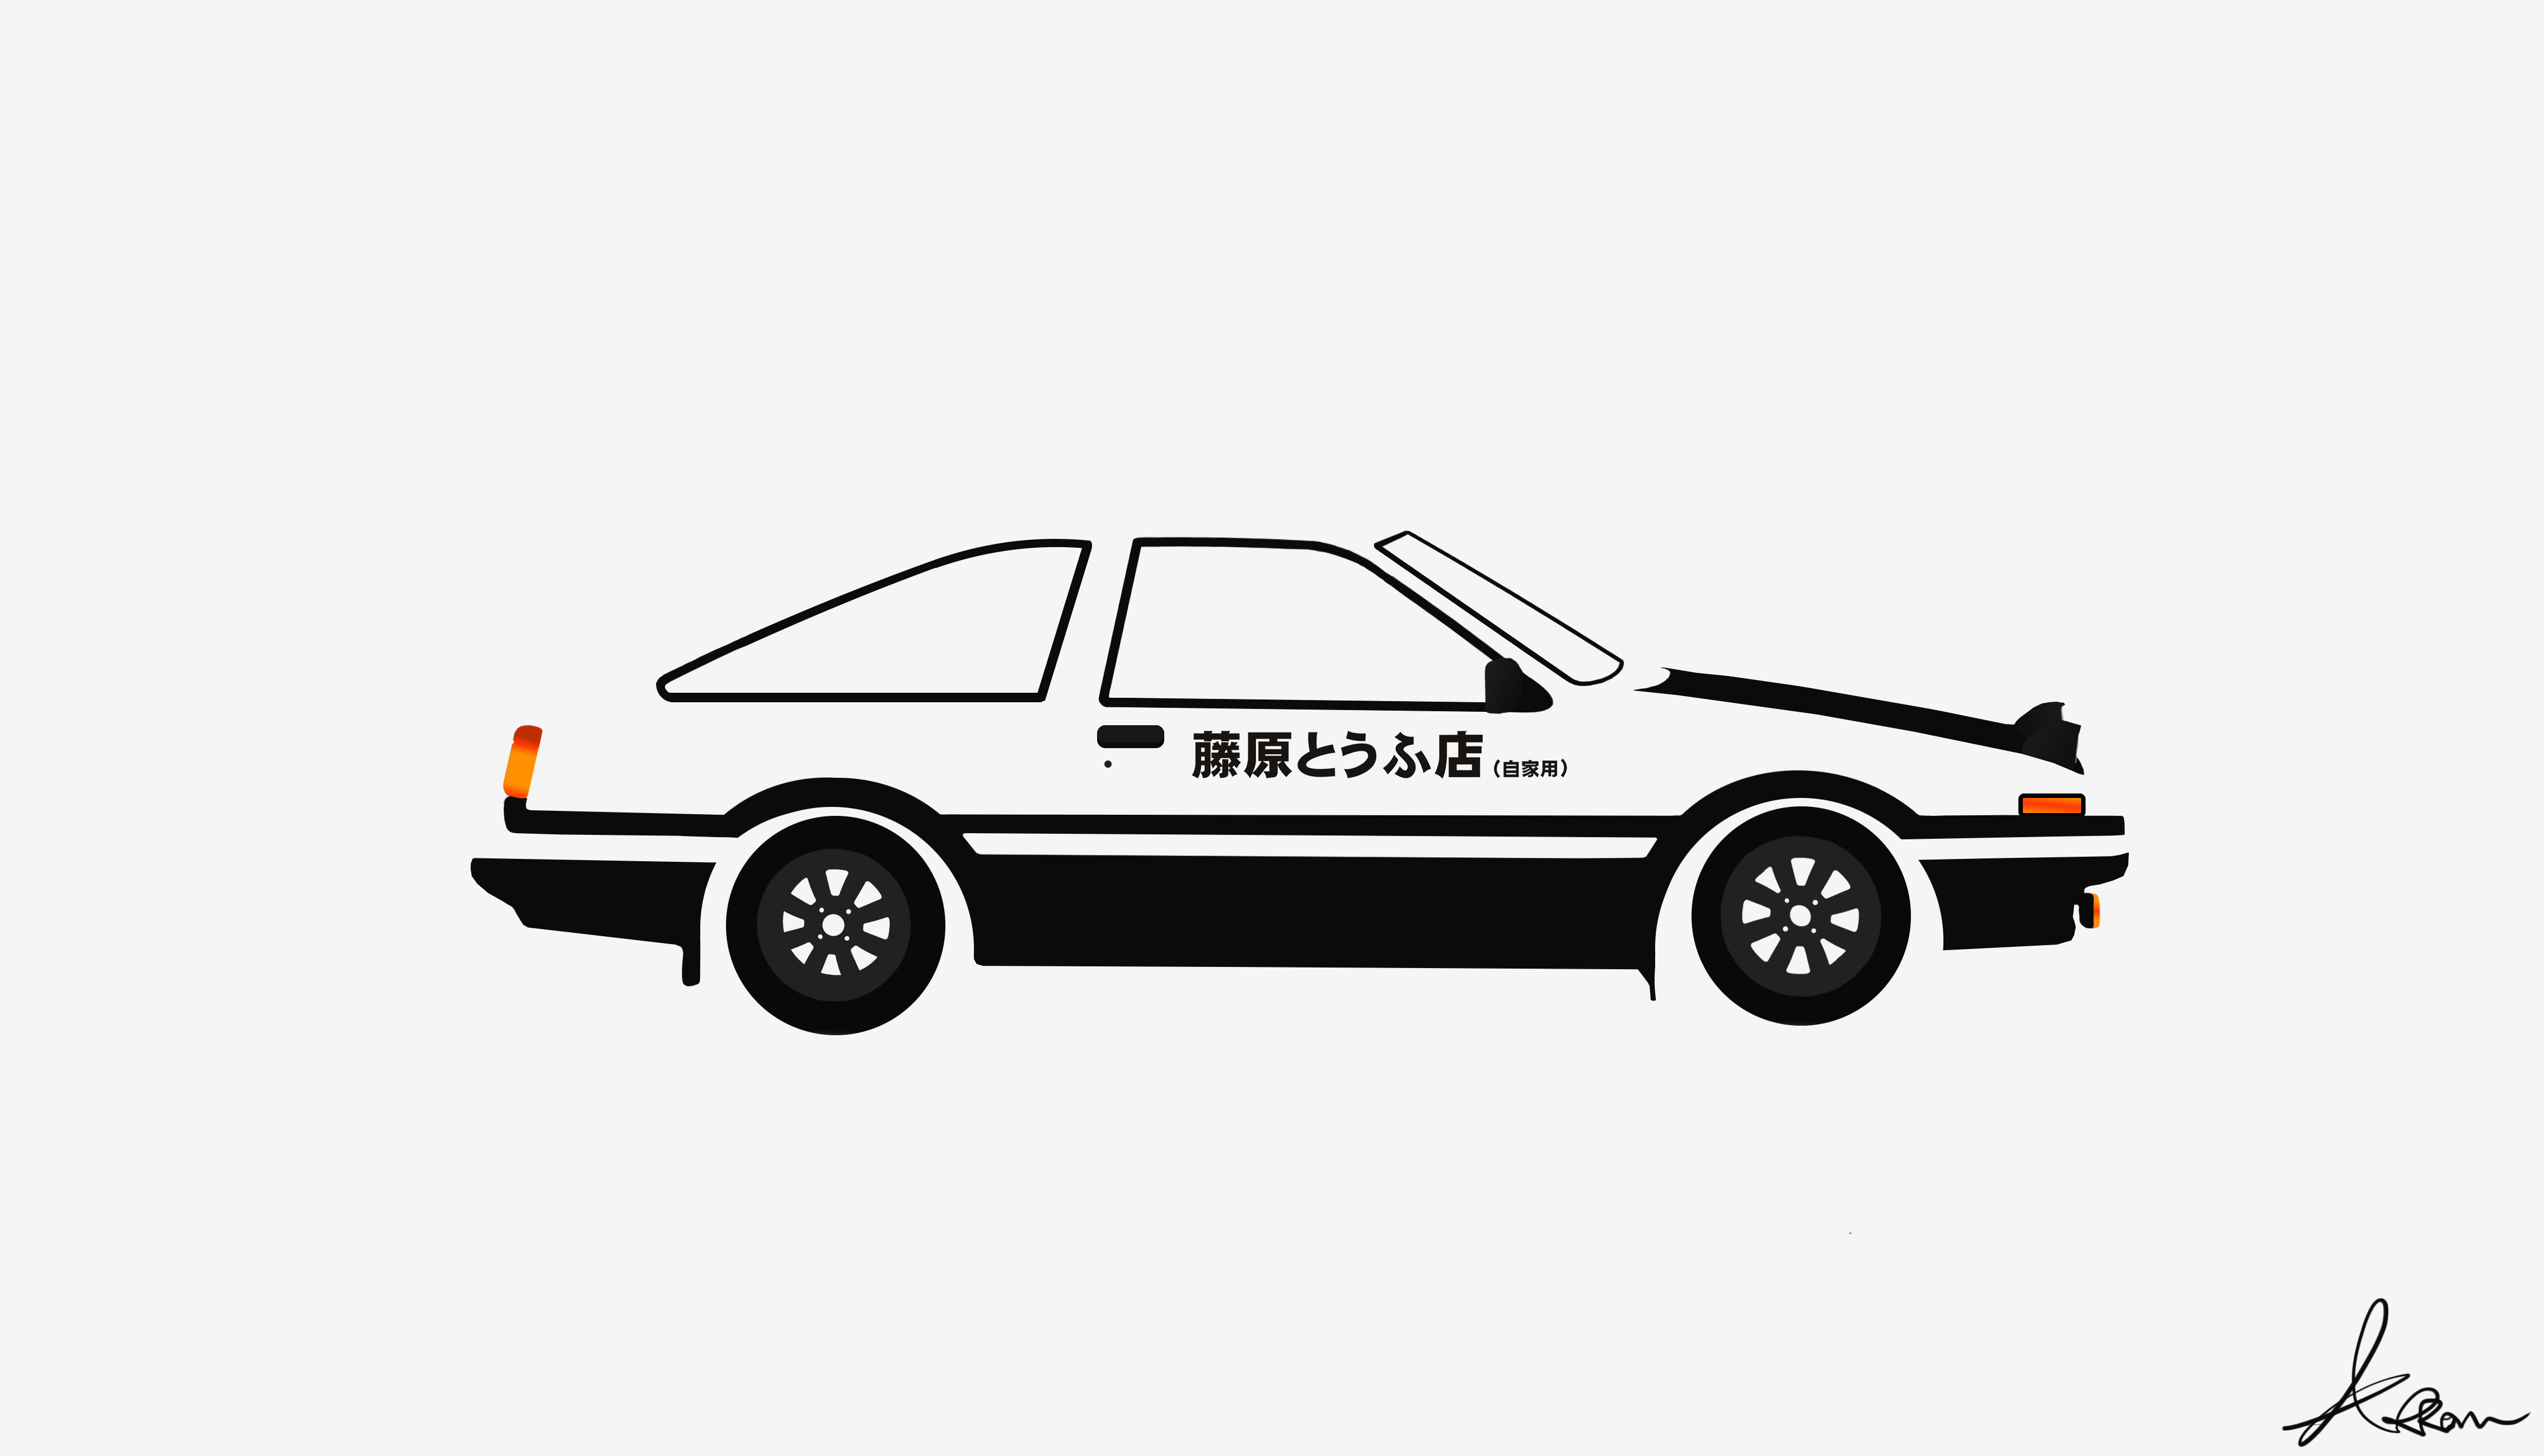 Toyota Ae86 Wallpapers Top Free Toyota Ae86 Backgrounds Wallpaperaccess